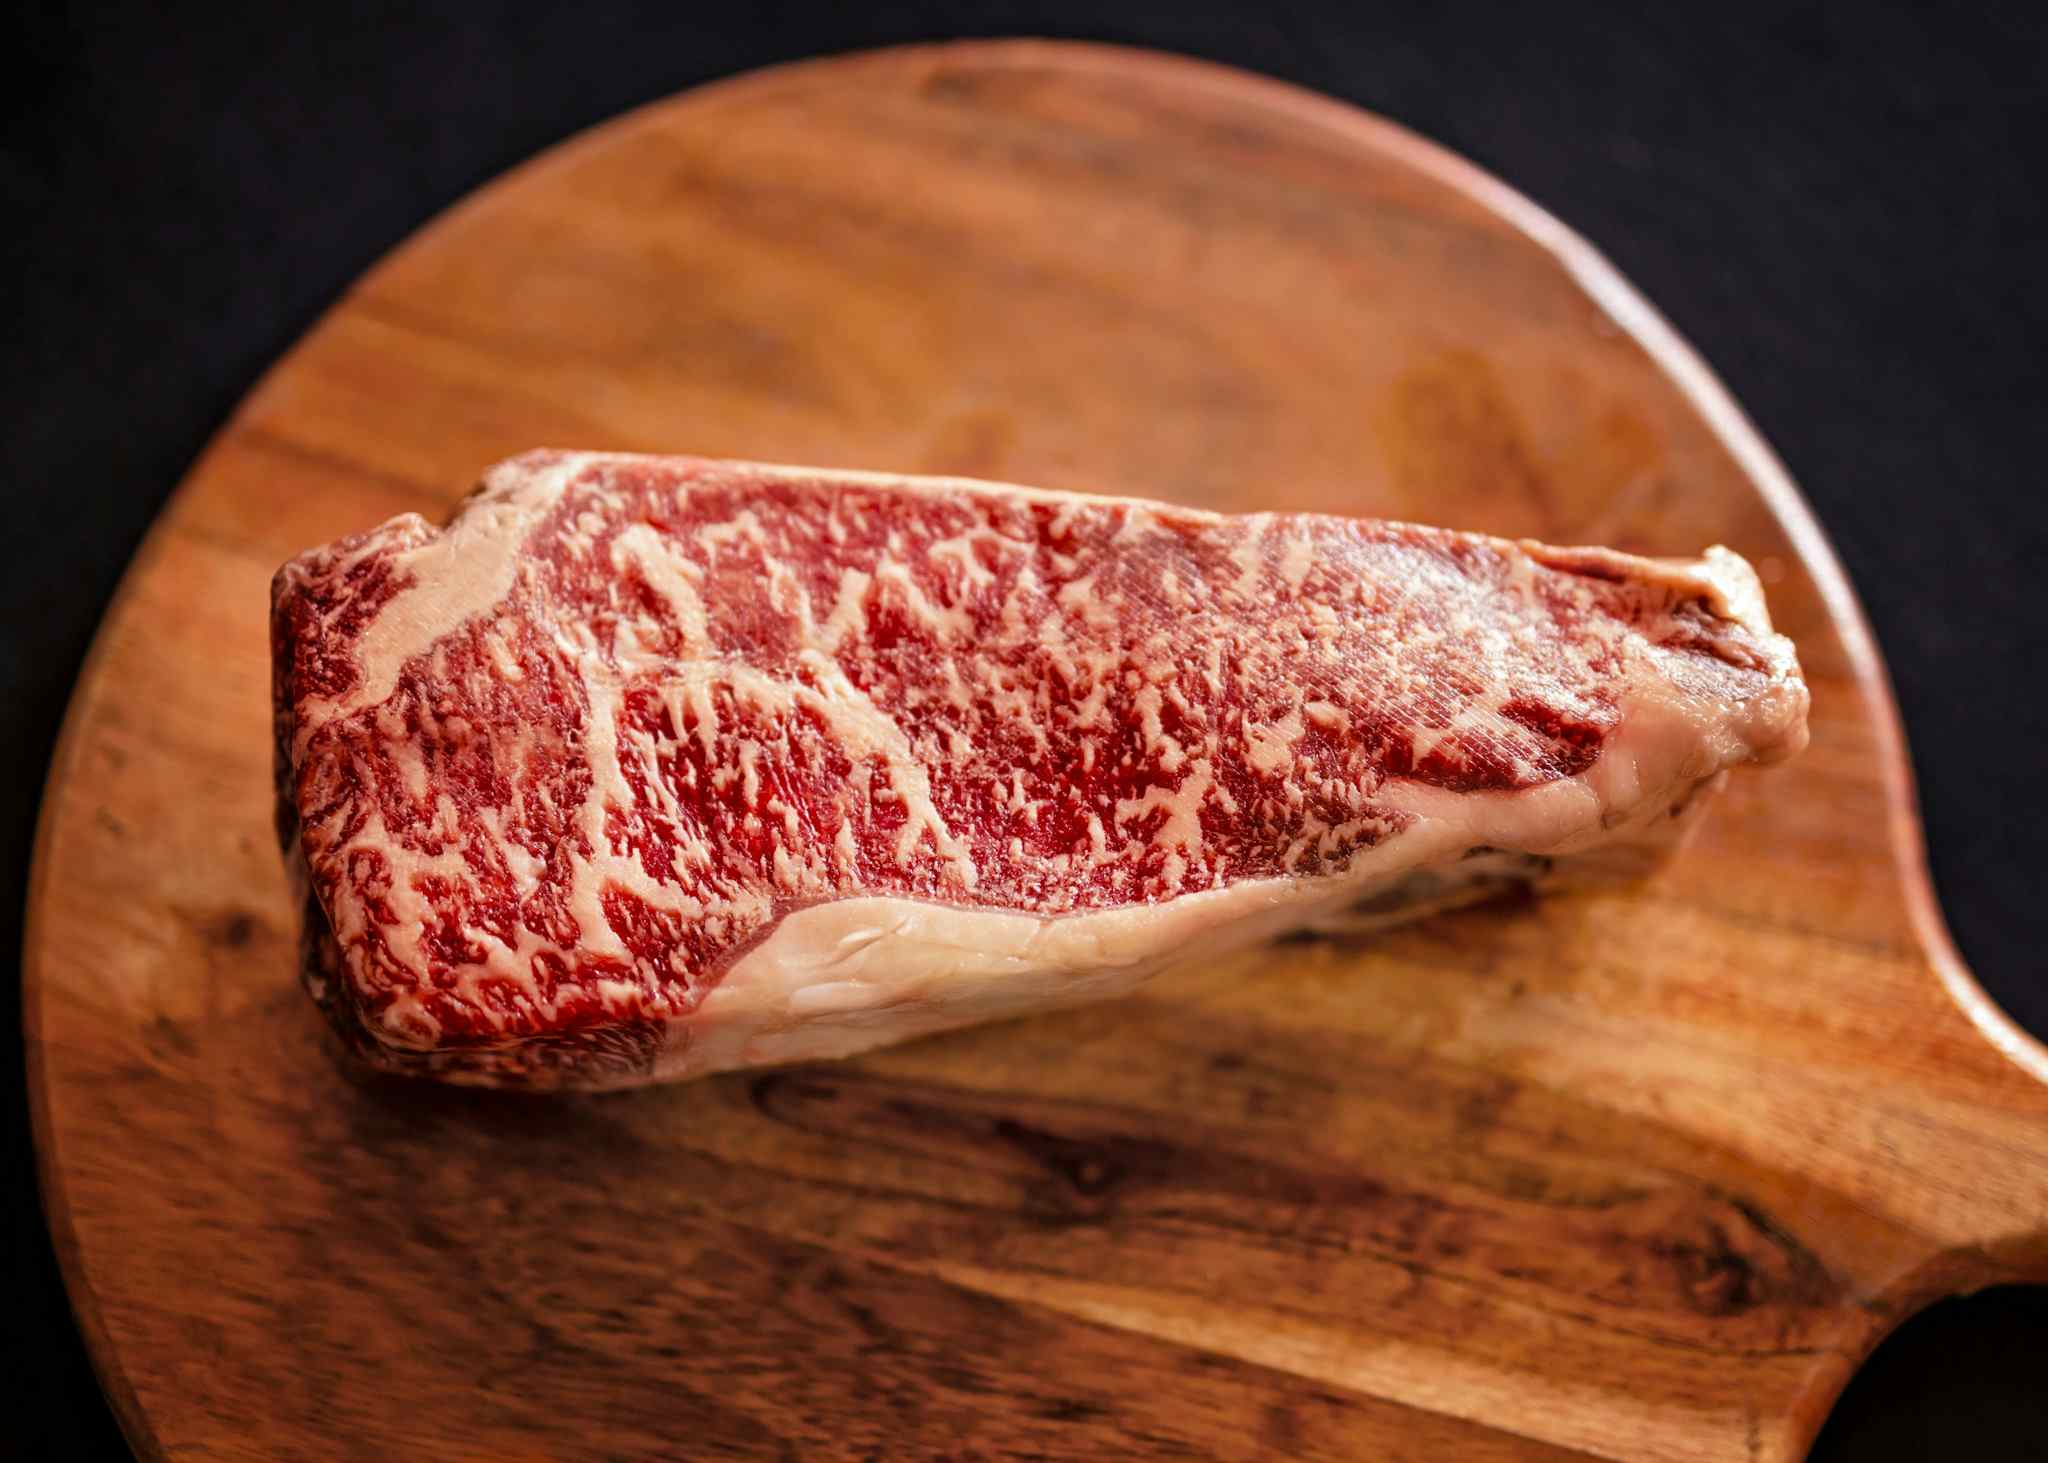 100% All-Natural Grass-Fed Fullblood Wagyu New York Strip